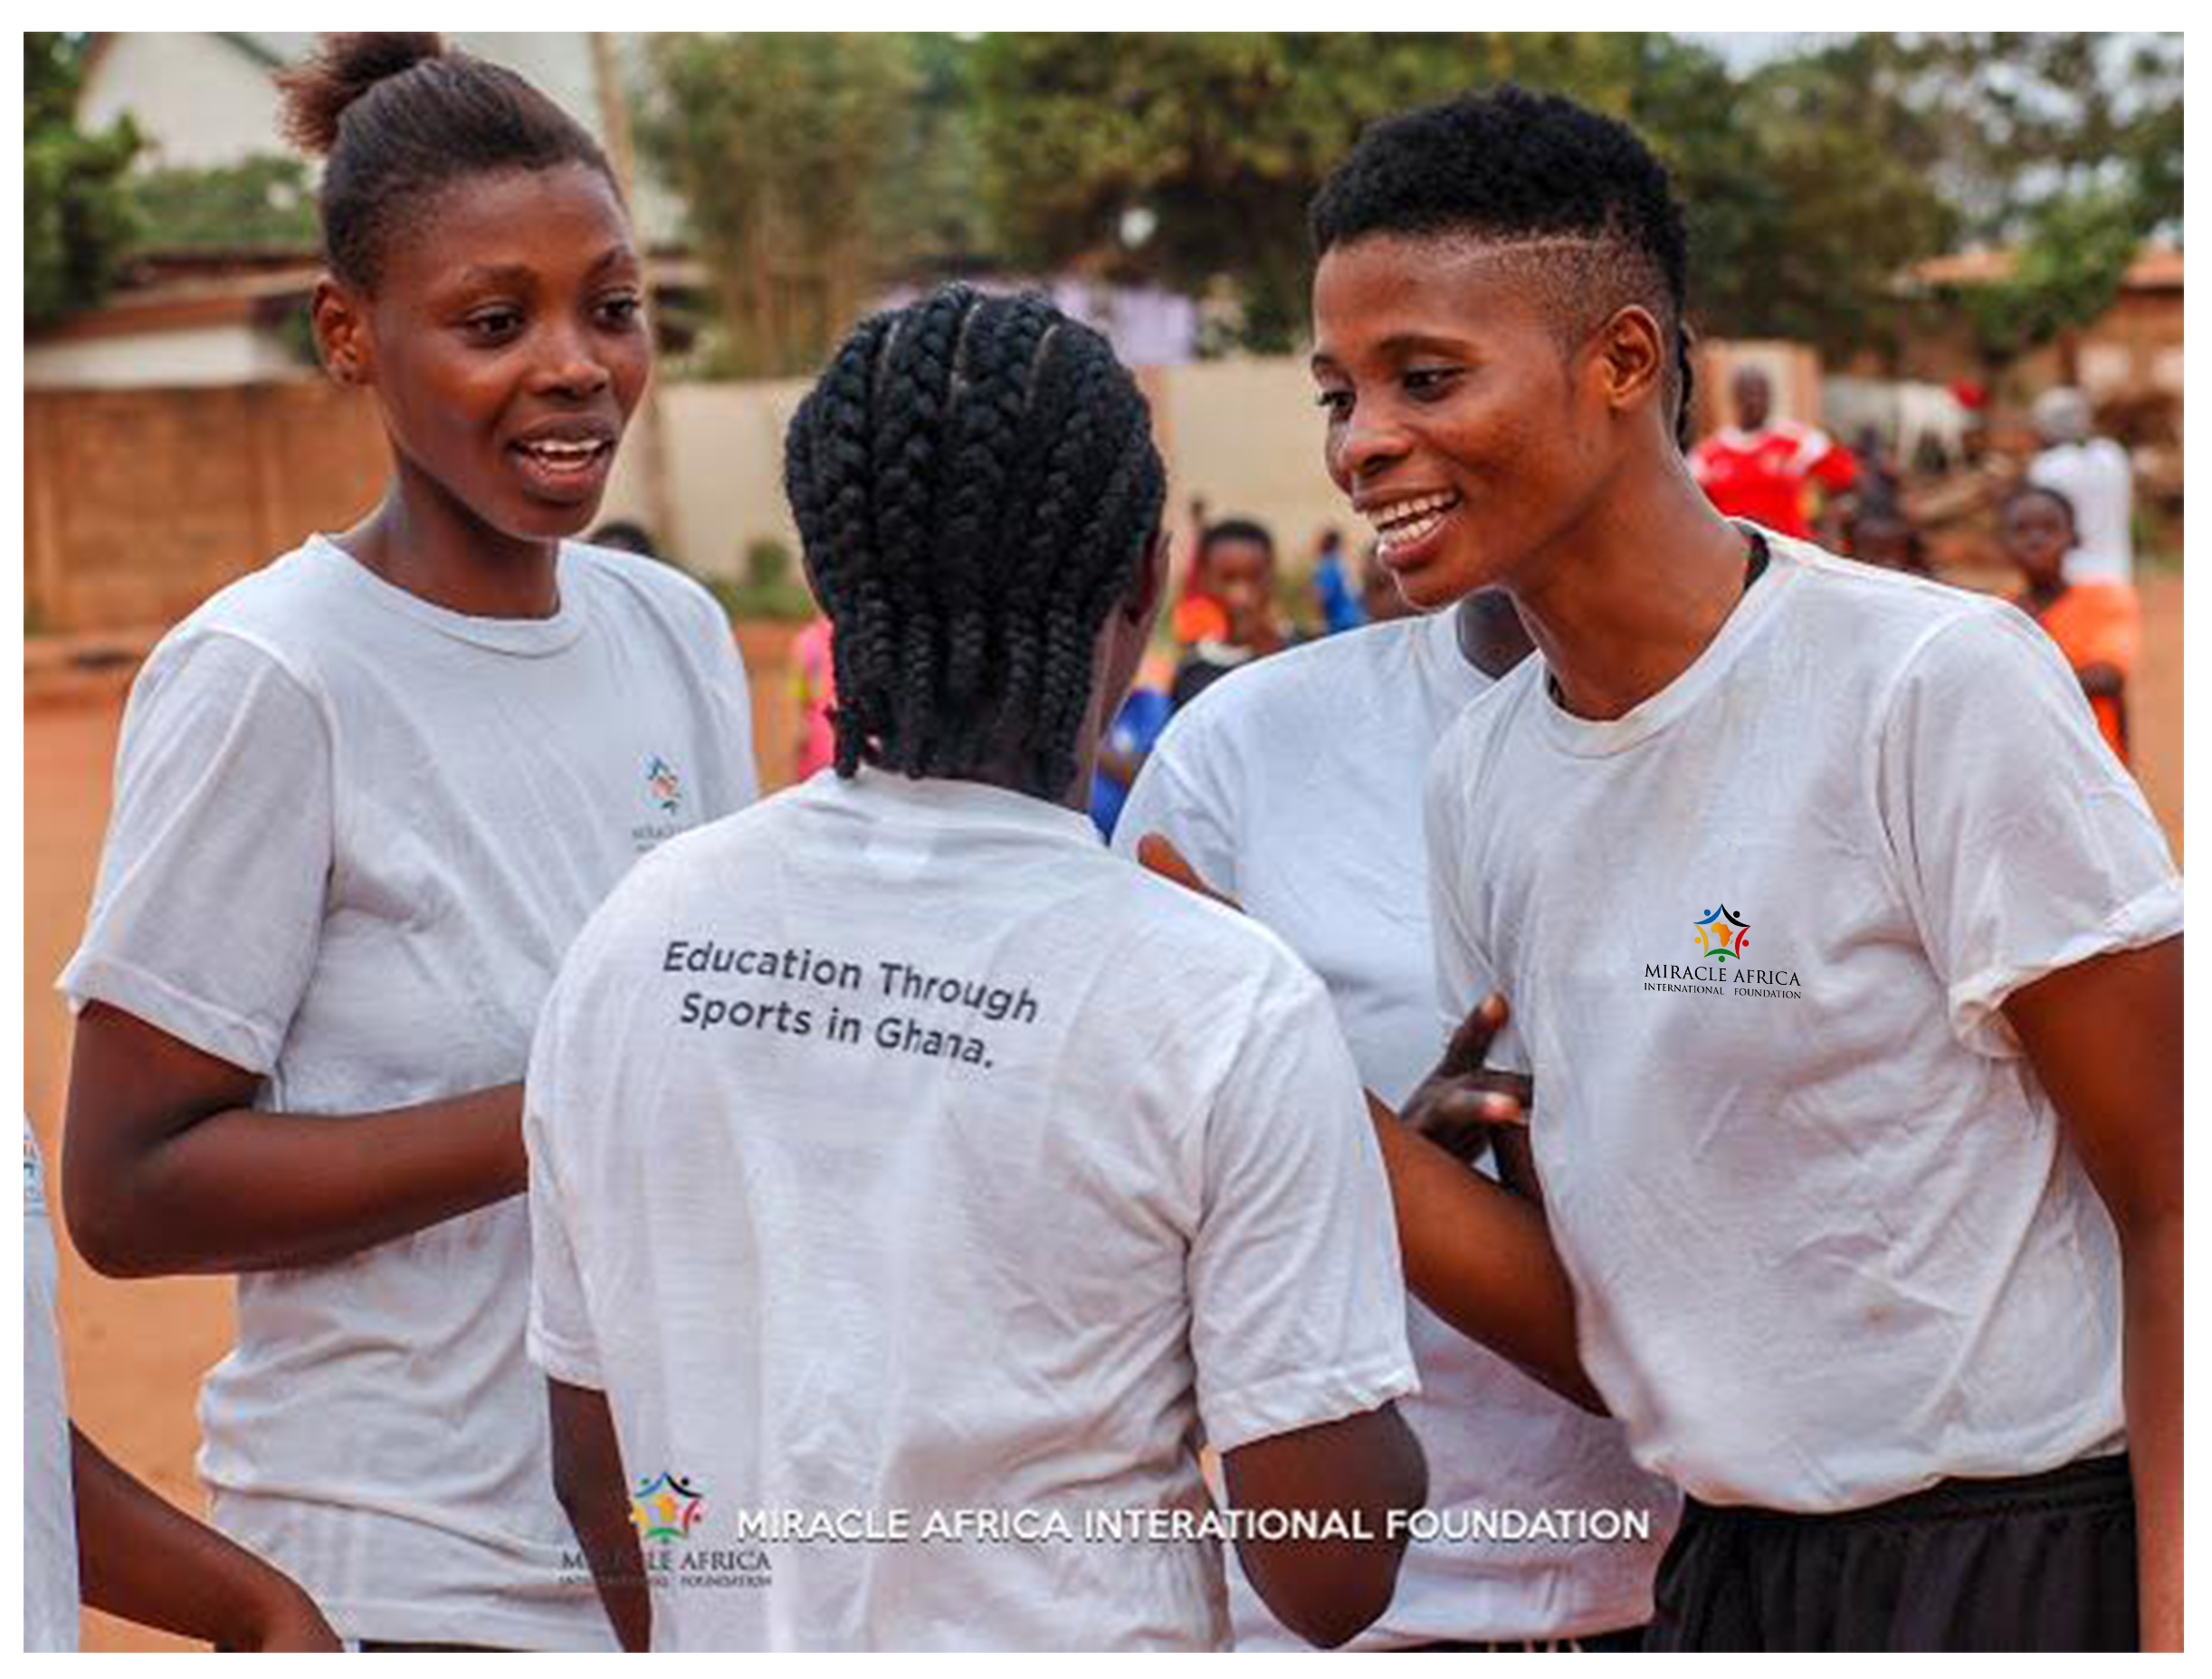 Miracle Africa International Foundation intervenes in Africa Youth’s Education through sports